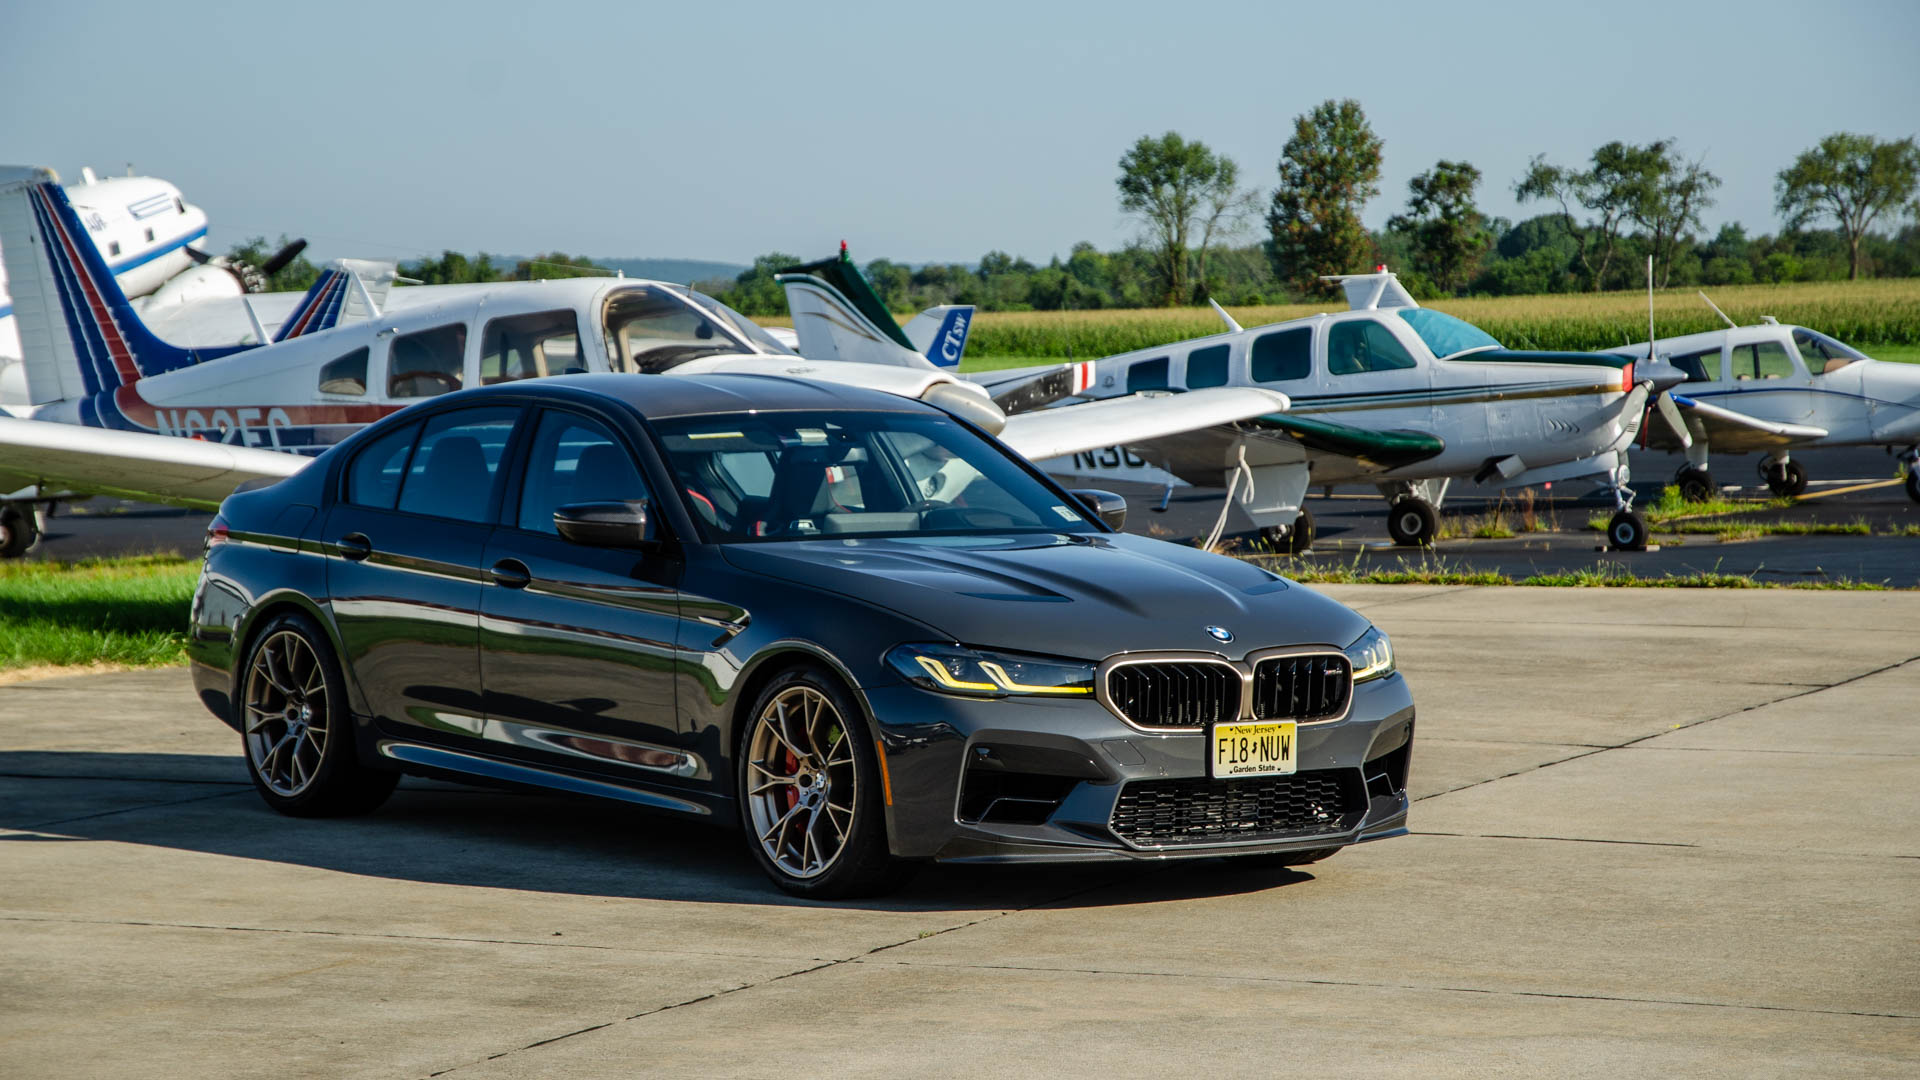 TEST DRIVE: BMW M5 CS — The M5 Goes Out with a Bang